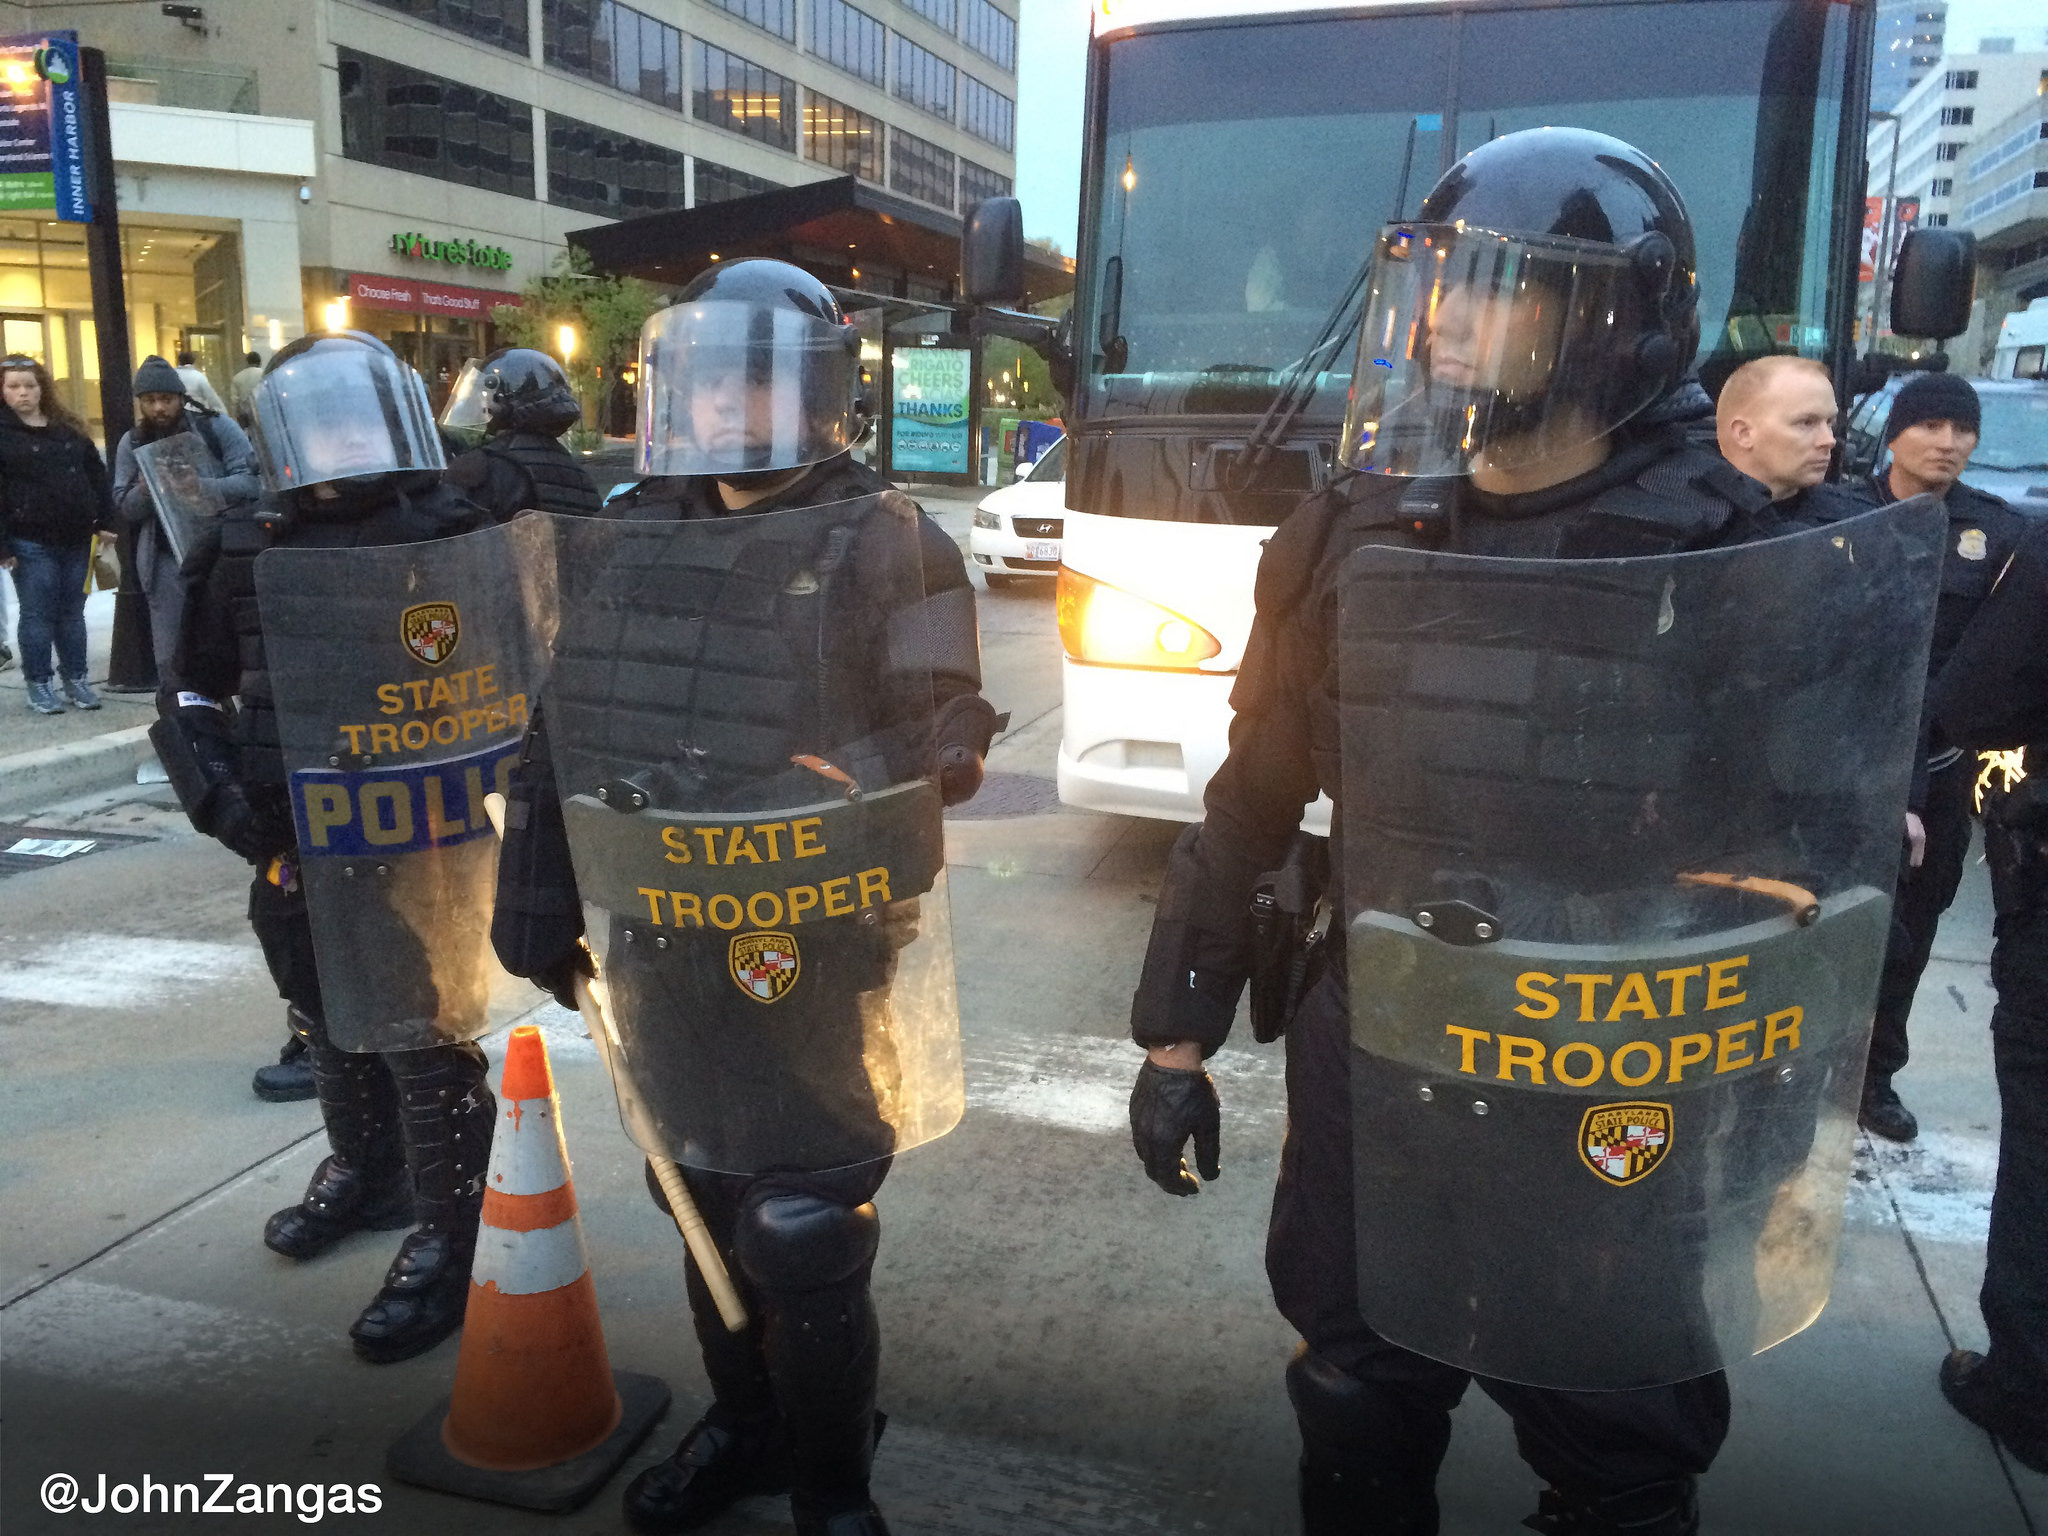 State Troopers Baltimore Riots Freddie Gray Protests 4-2015